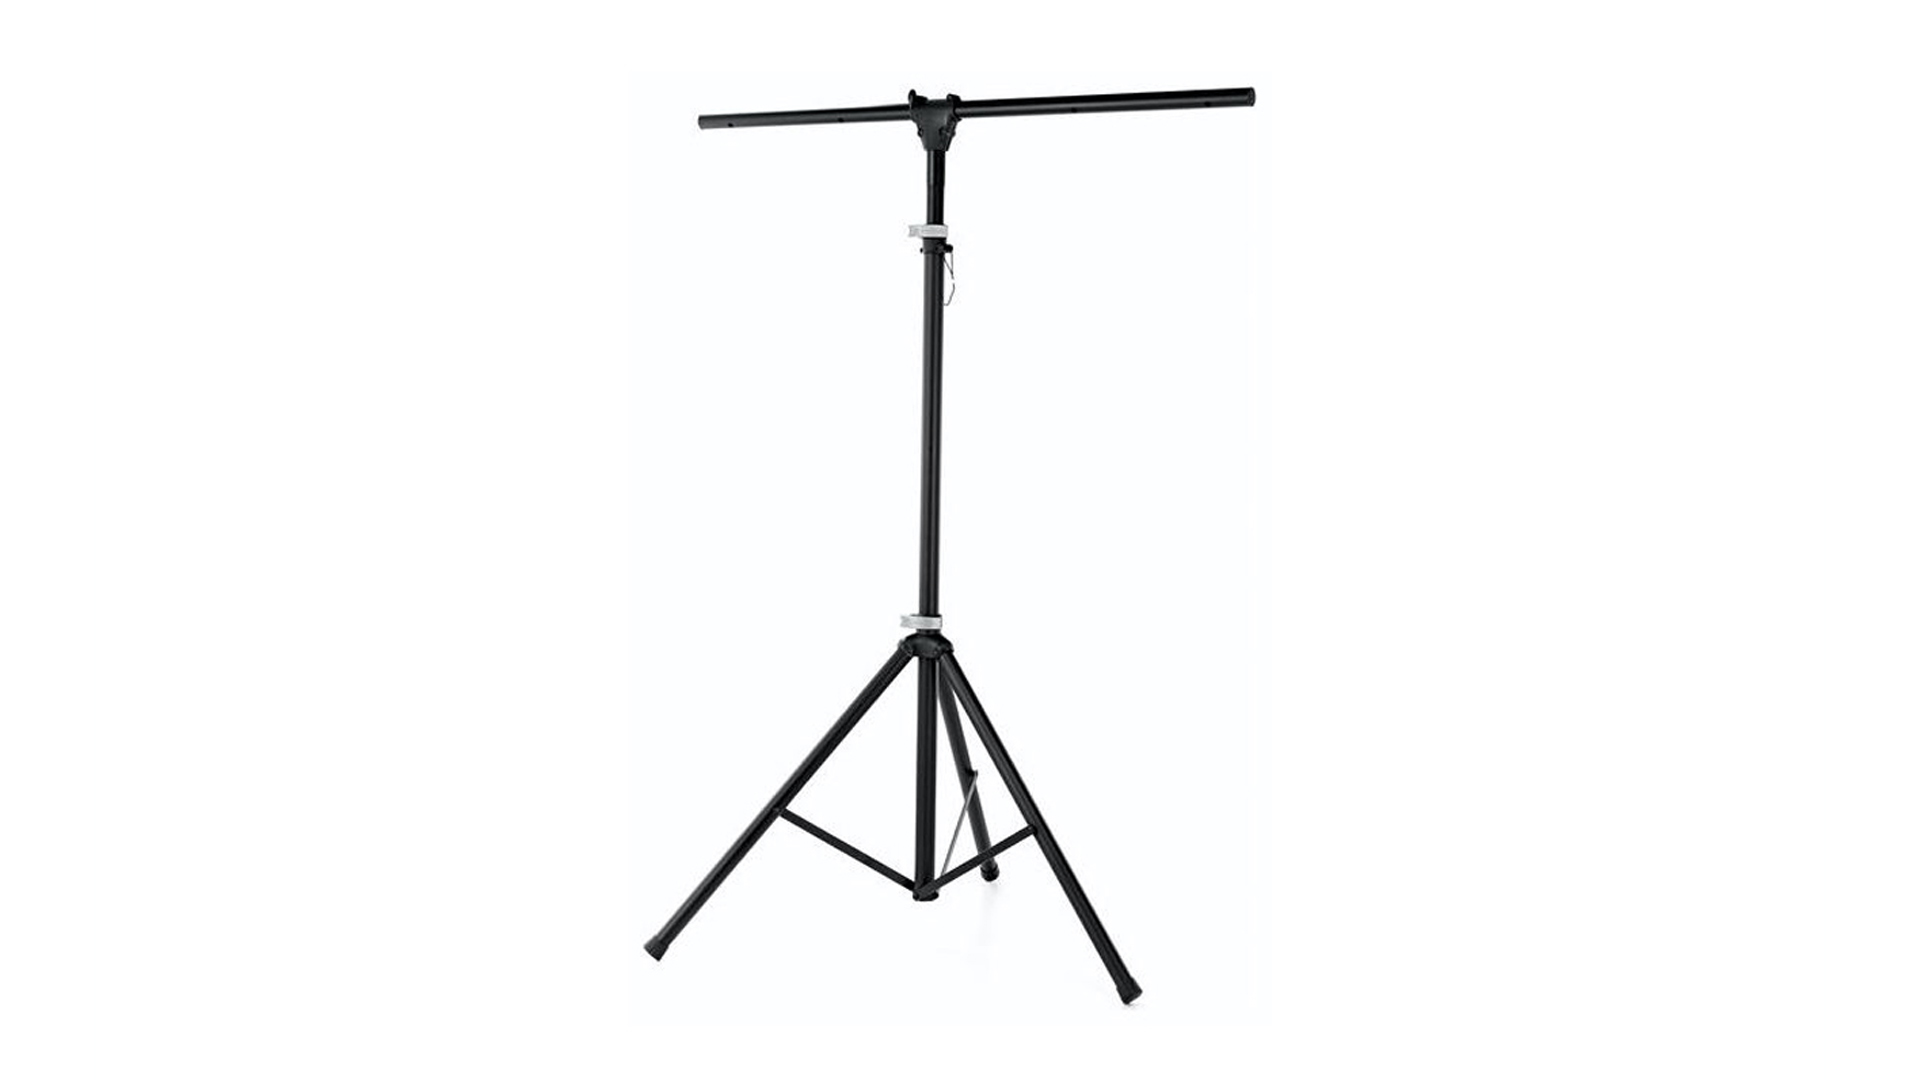 Hire K & M lighting T-Bar stand in Cardiff, Newport, Swansea, Carmarthenshire, Pembrokeshire & South West Wales